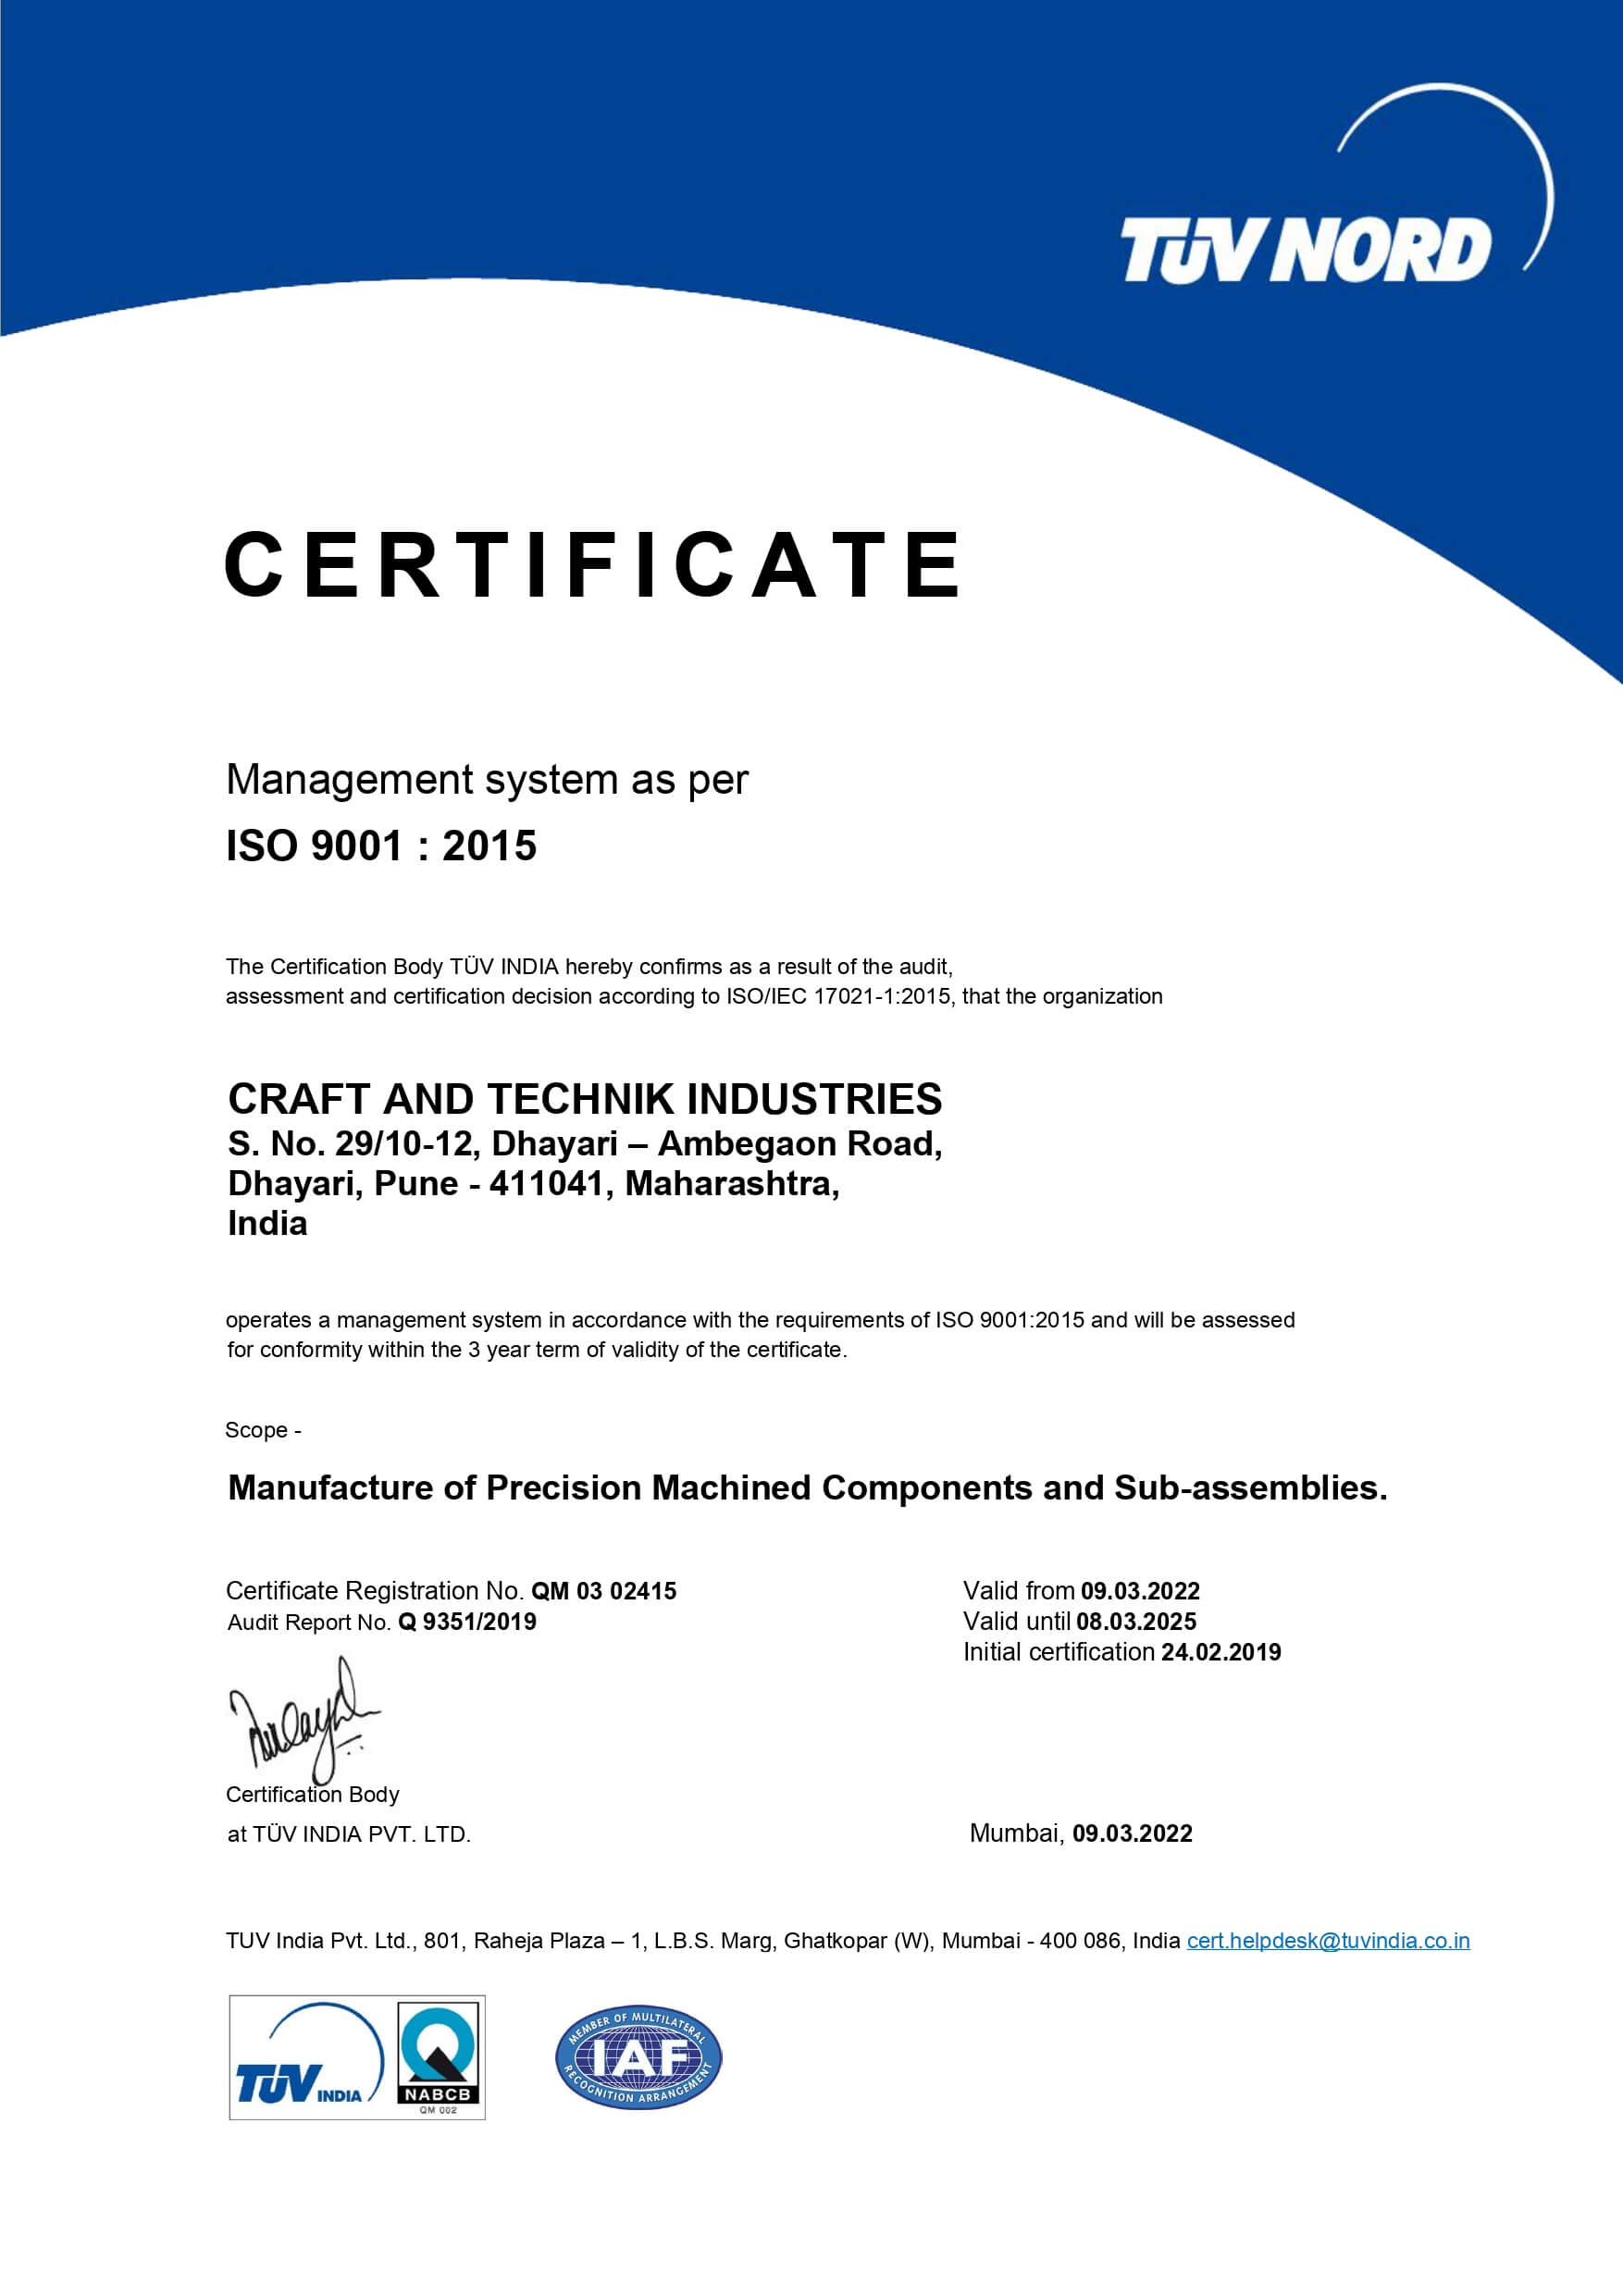 ISO 9001: 2015 Standard Certificate by TUV India